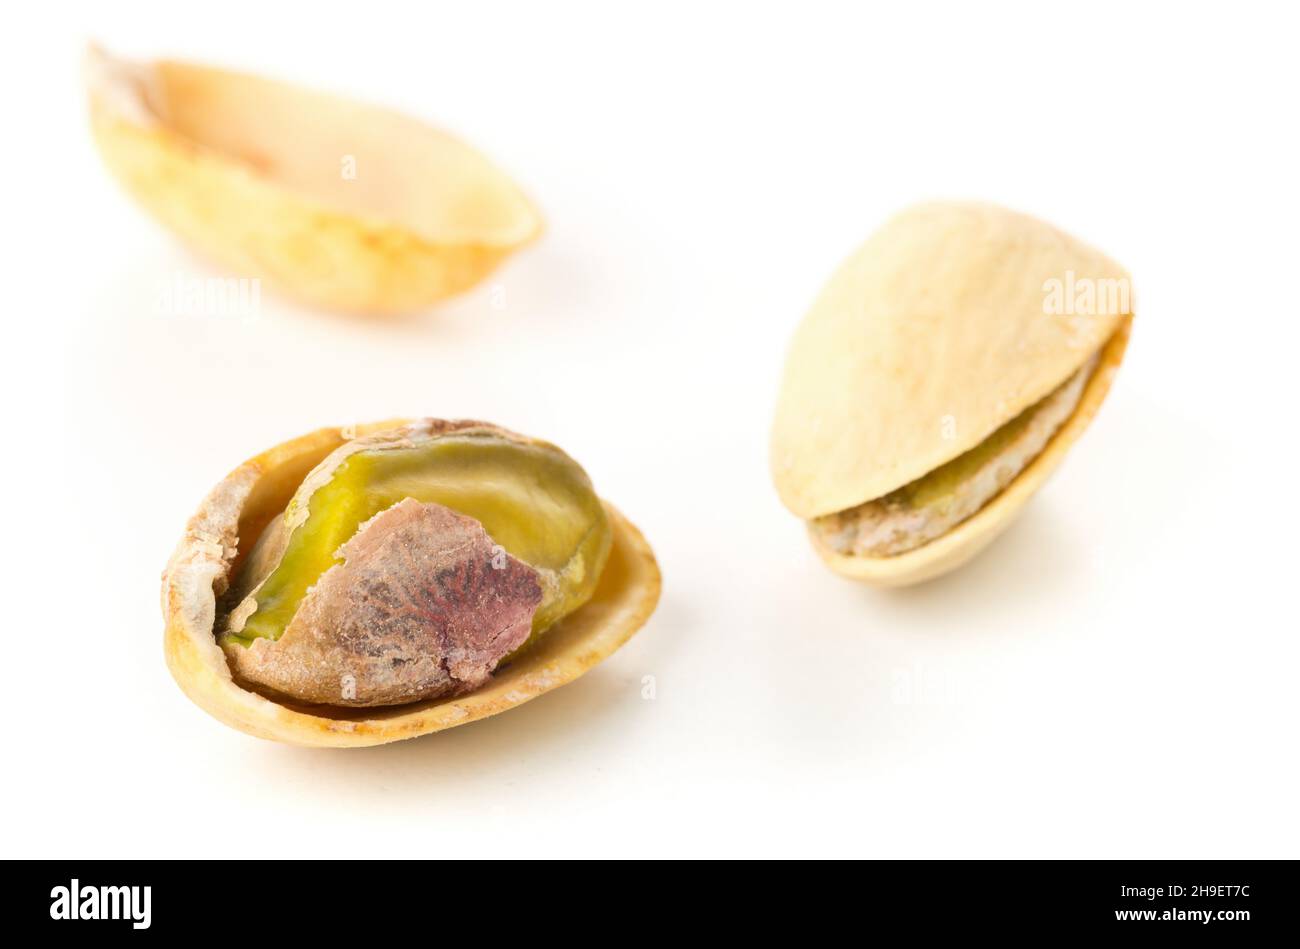 Macro of single salted, roasted green pistachio nut over white background, healthy food snack, selective focus Stock Photo